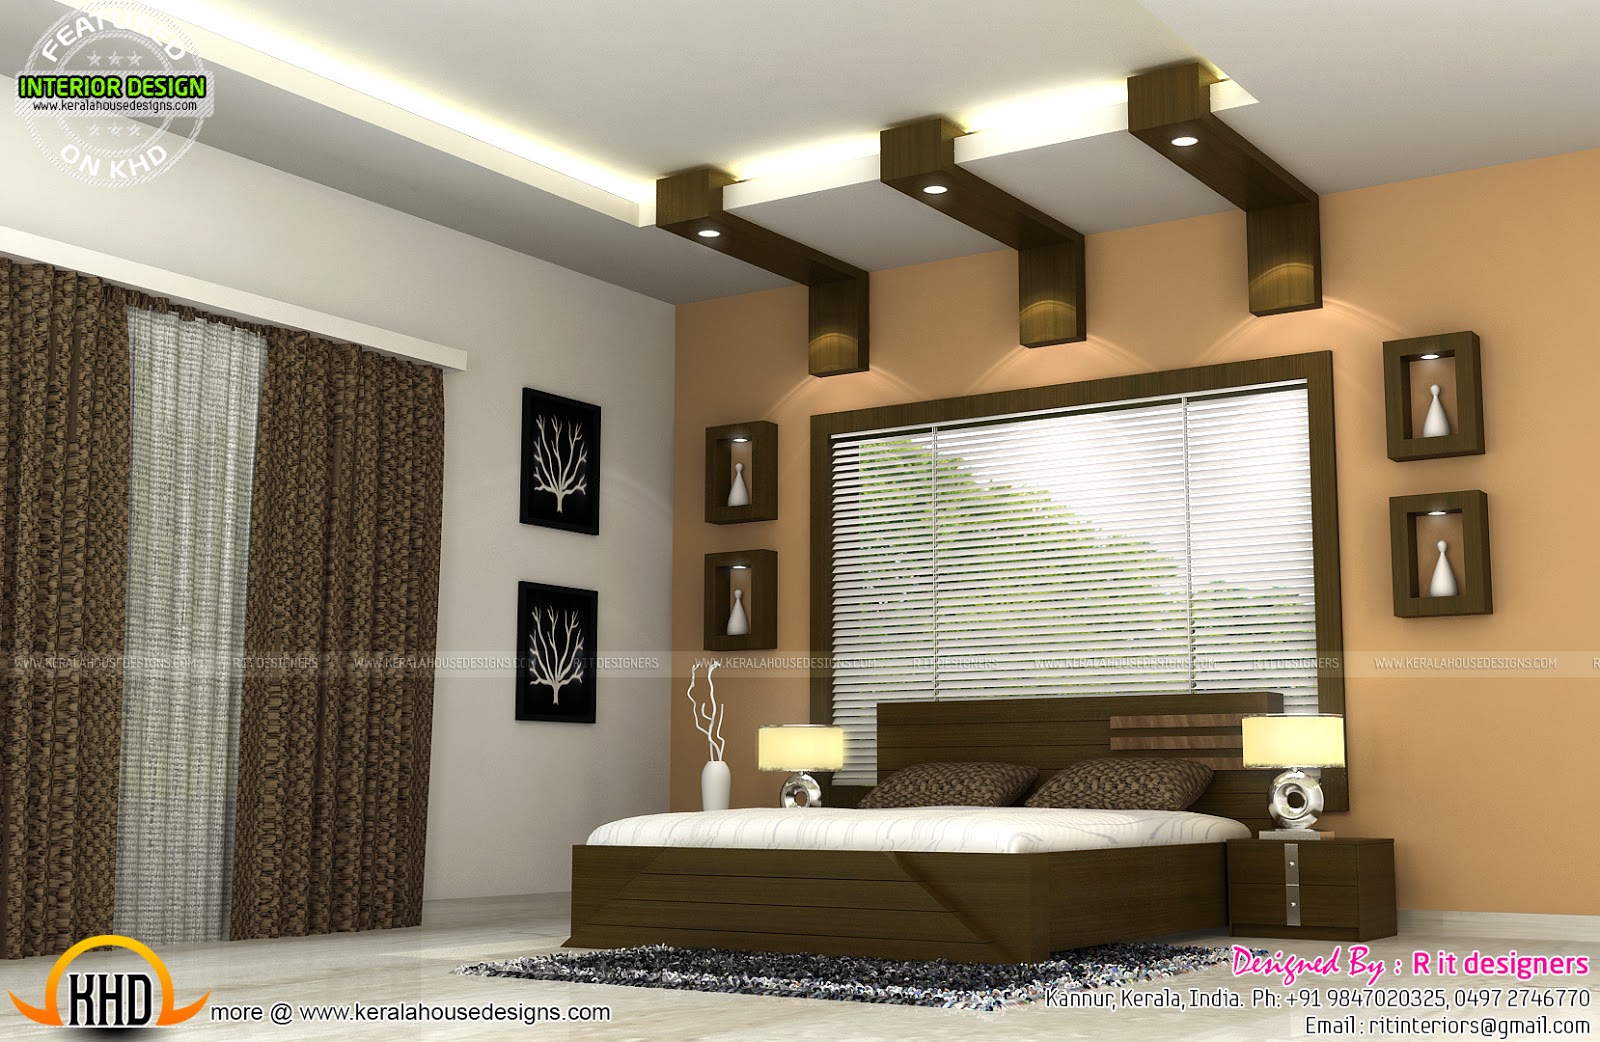 Interiors of bedrooms and kitchen  Kerala home design and floor plans